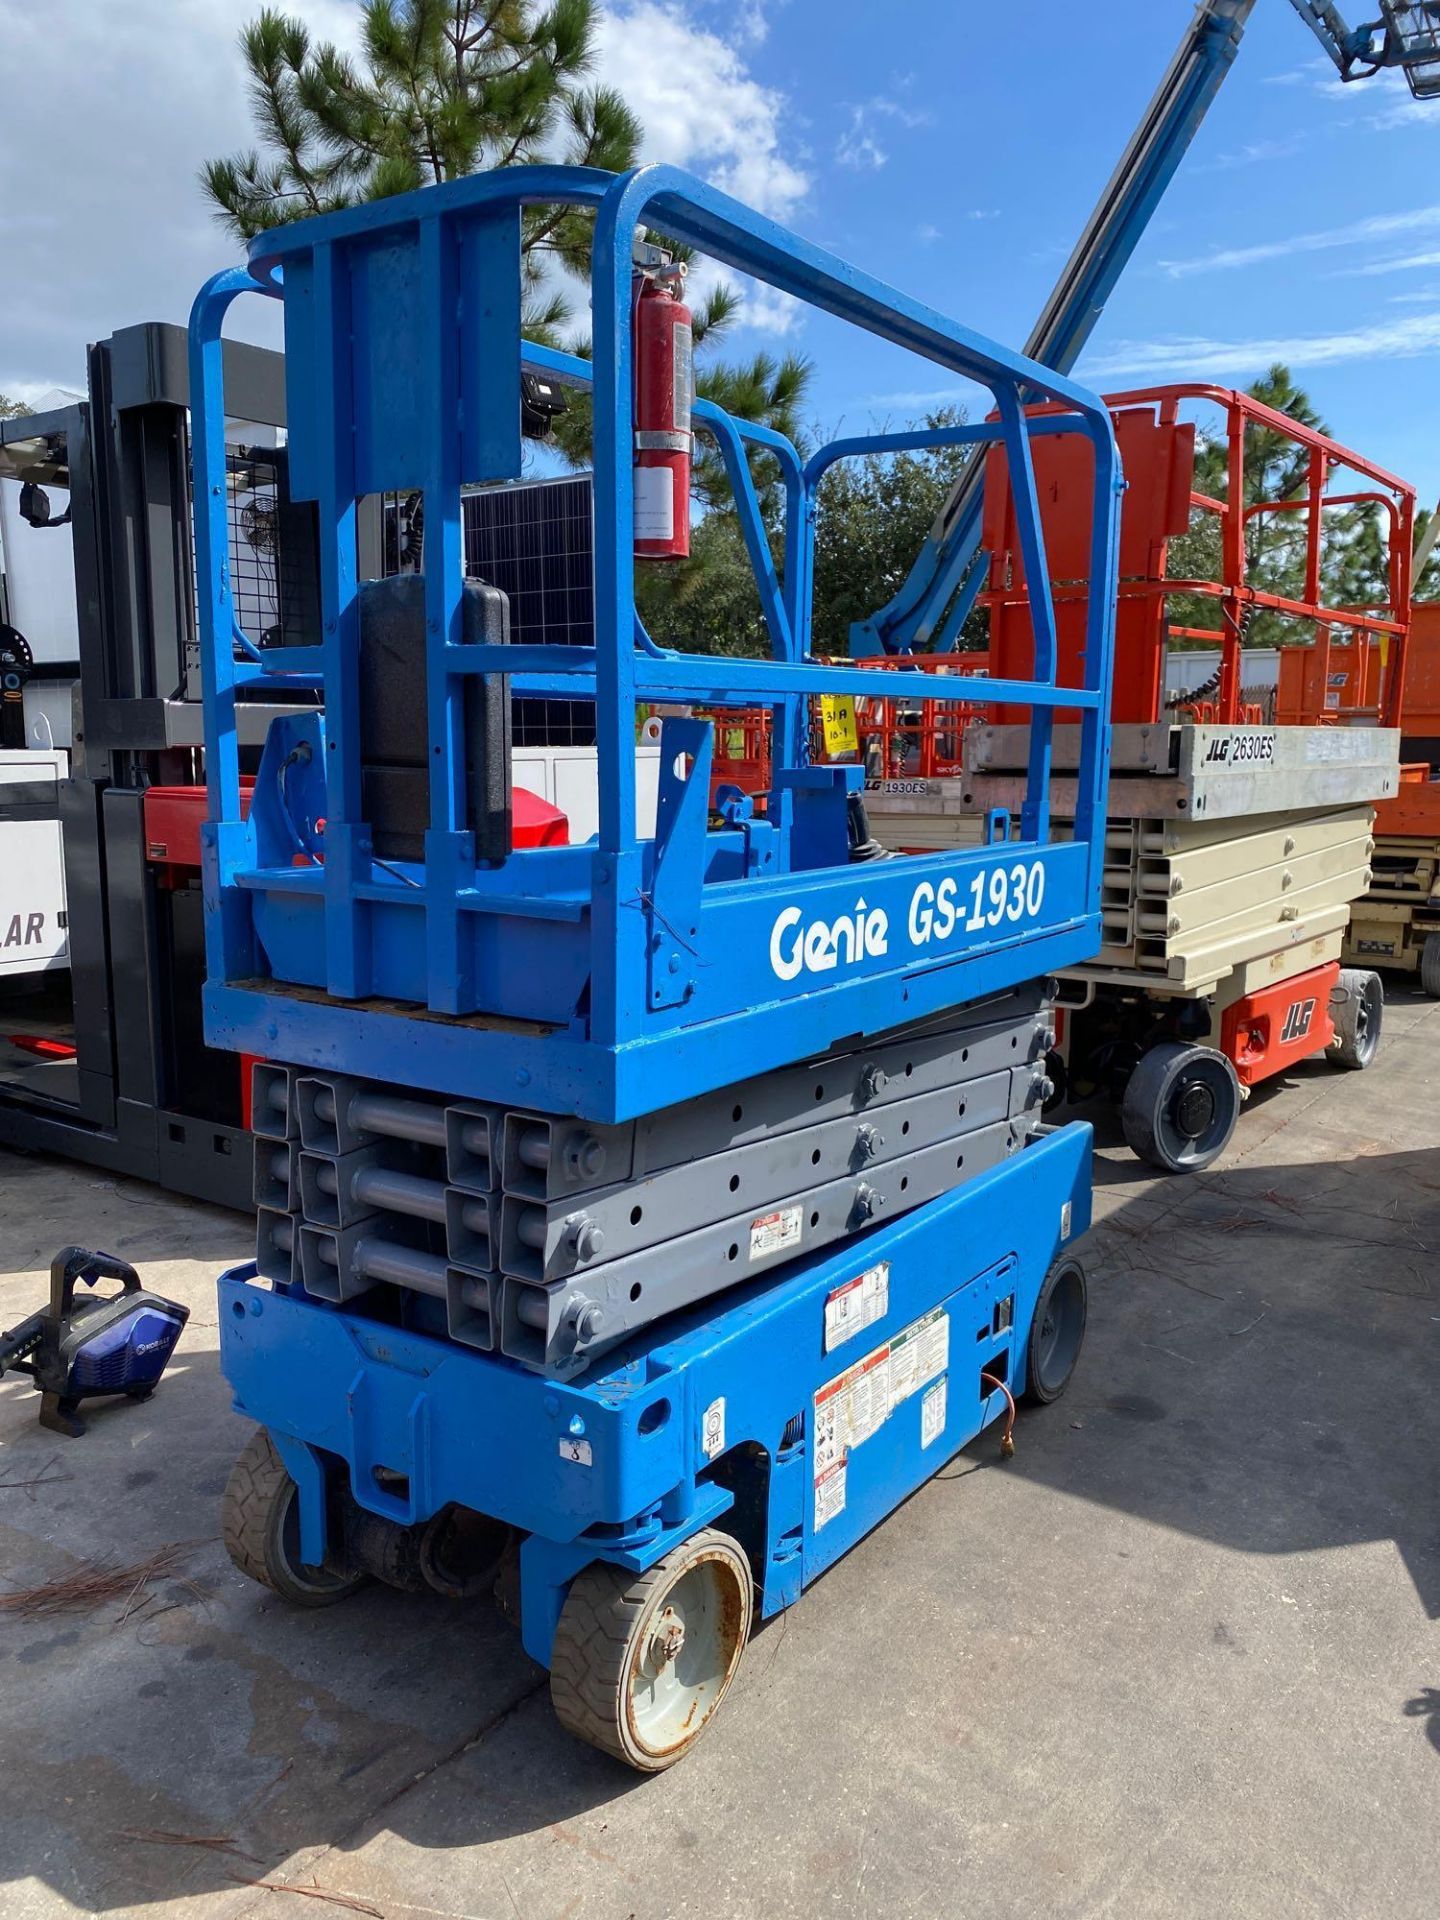 GENIE GS-1930 ELECTRIC SCISSOR LIFT, BUILT IN BATTERY CHARGER, 19' PLATFORM HEIGHT, SELF PROPELLED, - Image 2 of 6